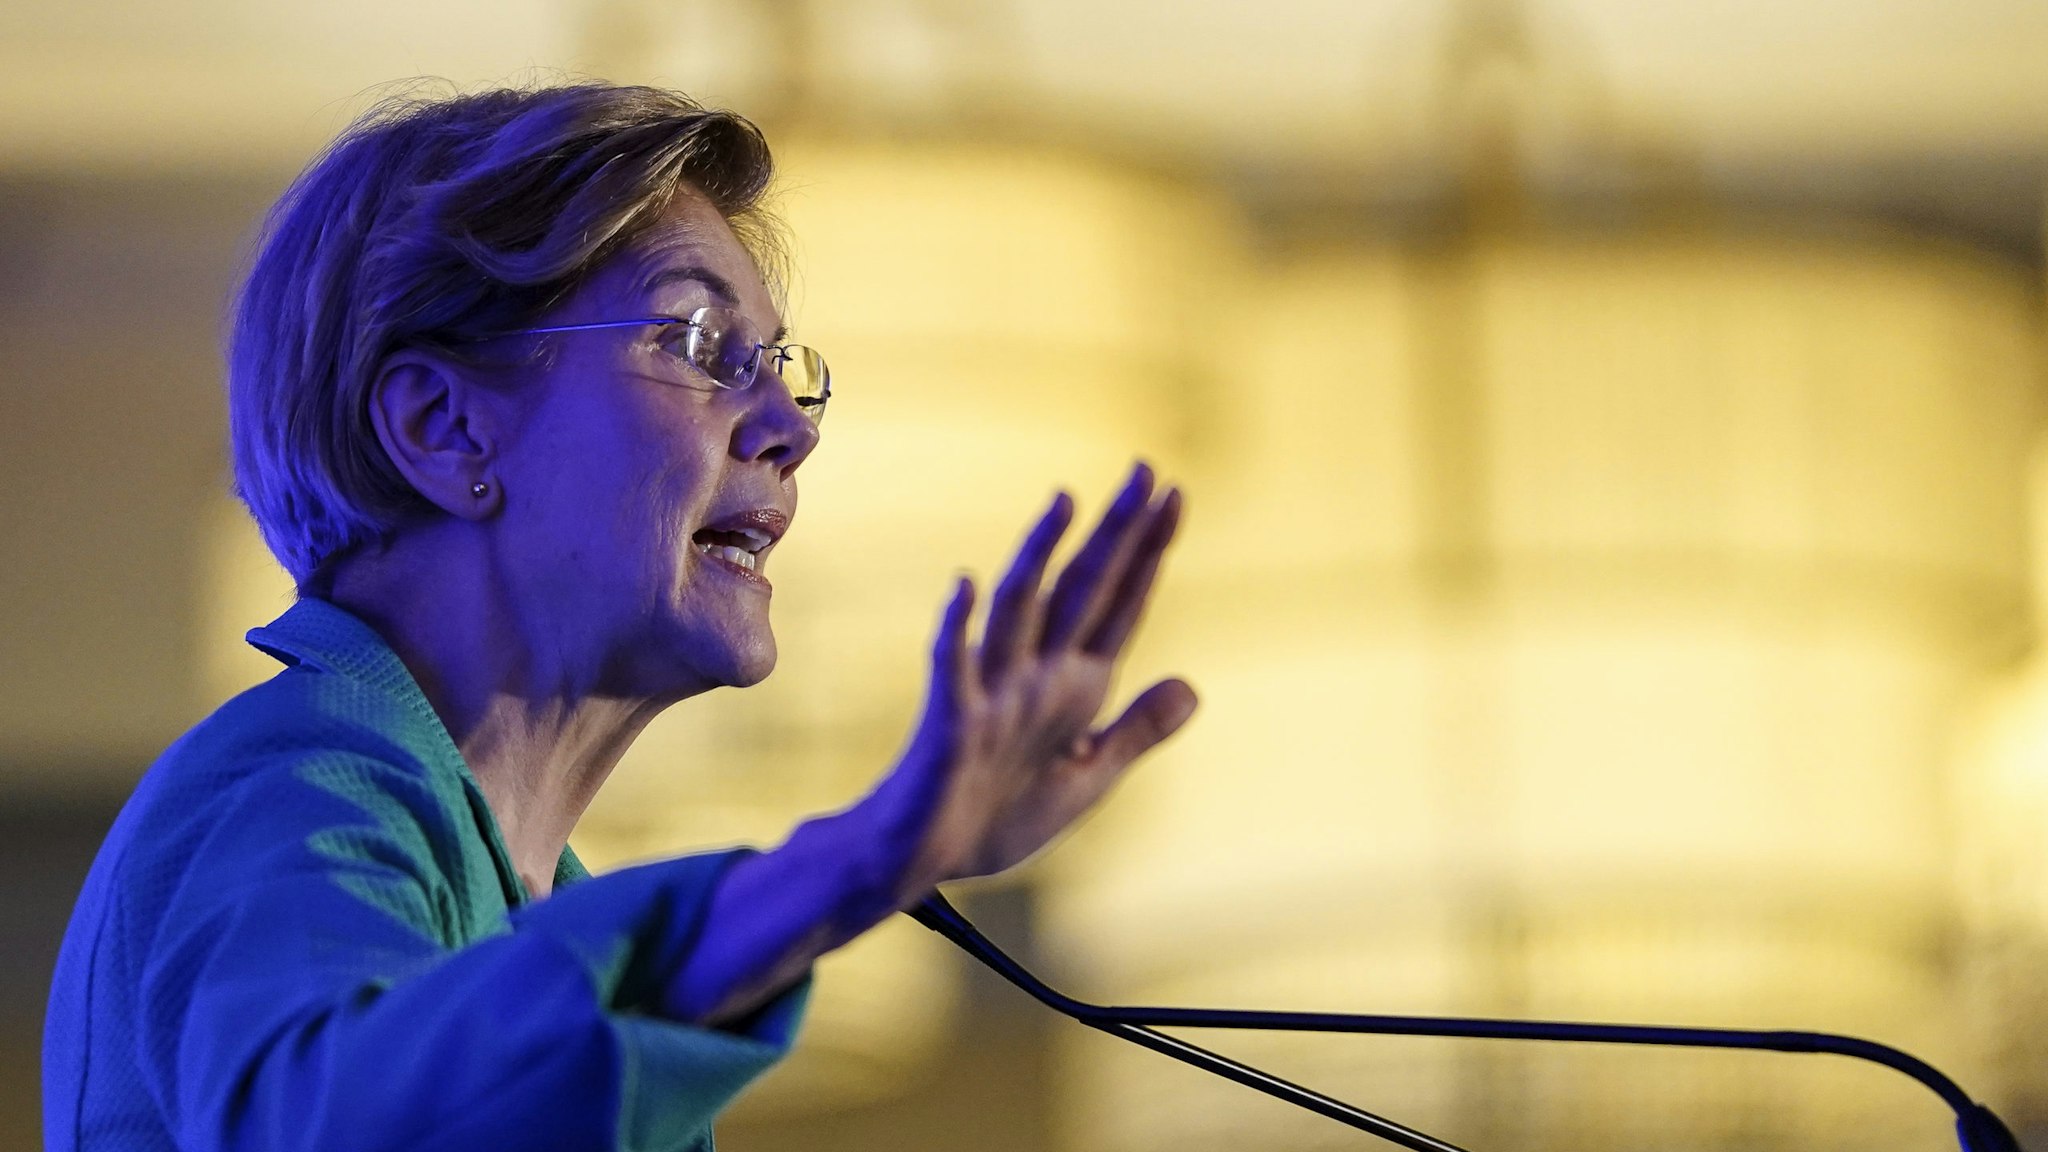 CHARLESTON, SC - FEBRUARY 24: Democratic presidential candidate Sen. Elizabeth Warren (D-MA) speaks at the South Carolina Democratic Party "First in the South" dinner on February 24, 2020 in Charleston, South Carolina. South Carolina holds its Democratic presidential primary on Saturday, February 29. (Photo by Drew Angerer/Getty Images)